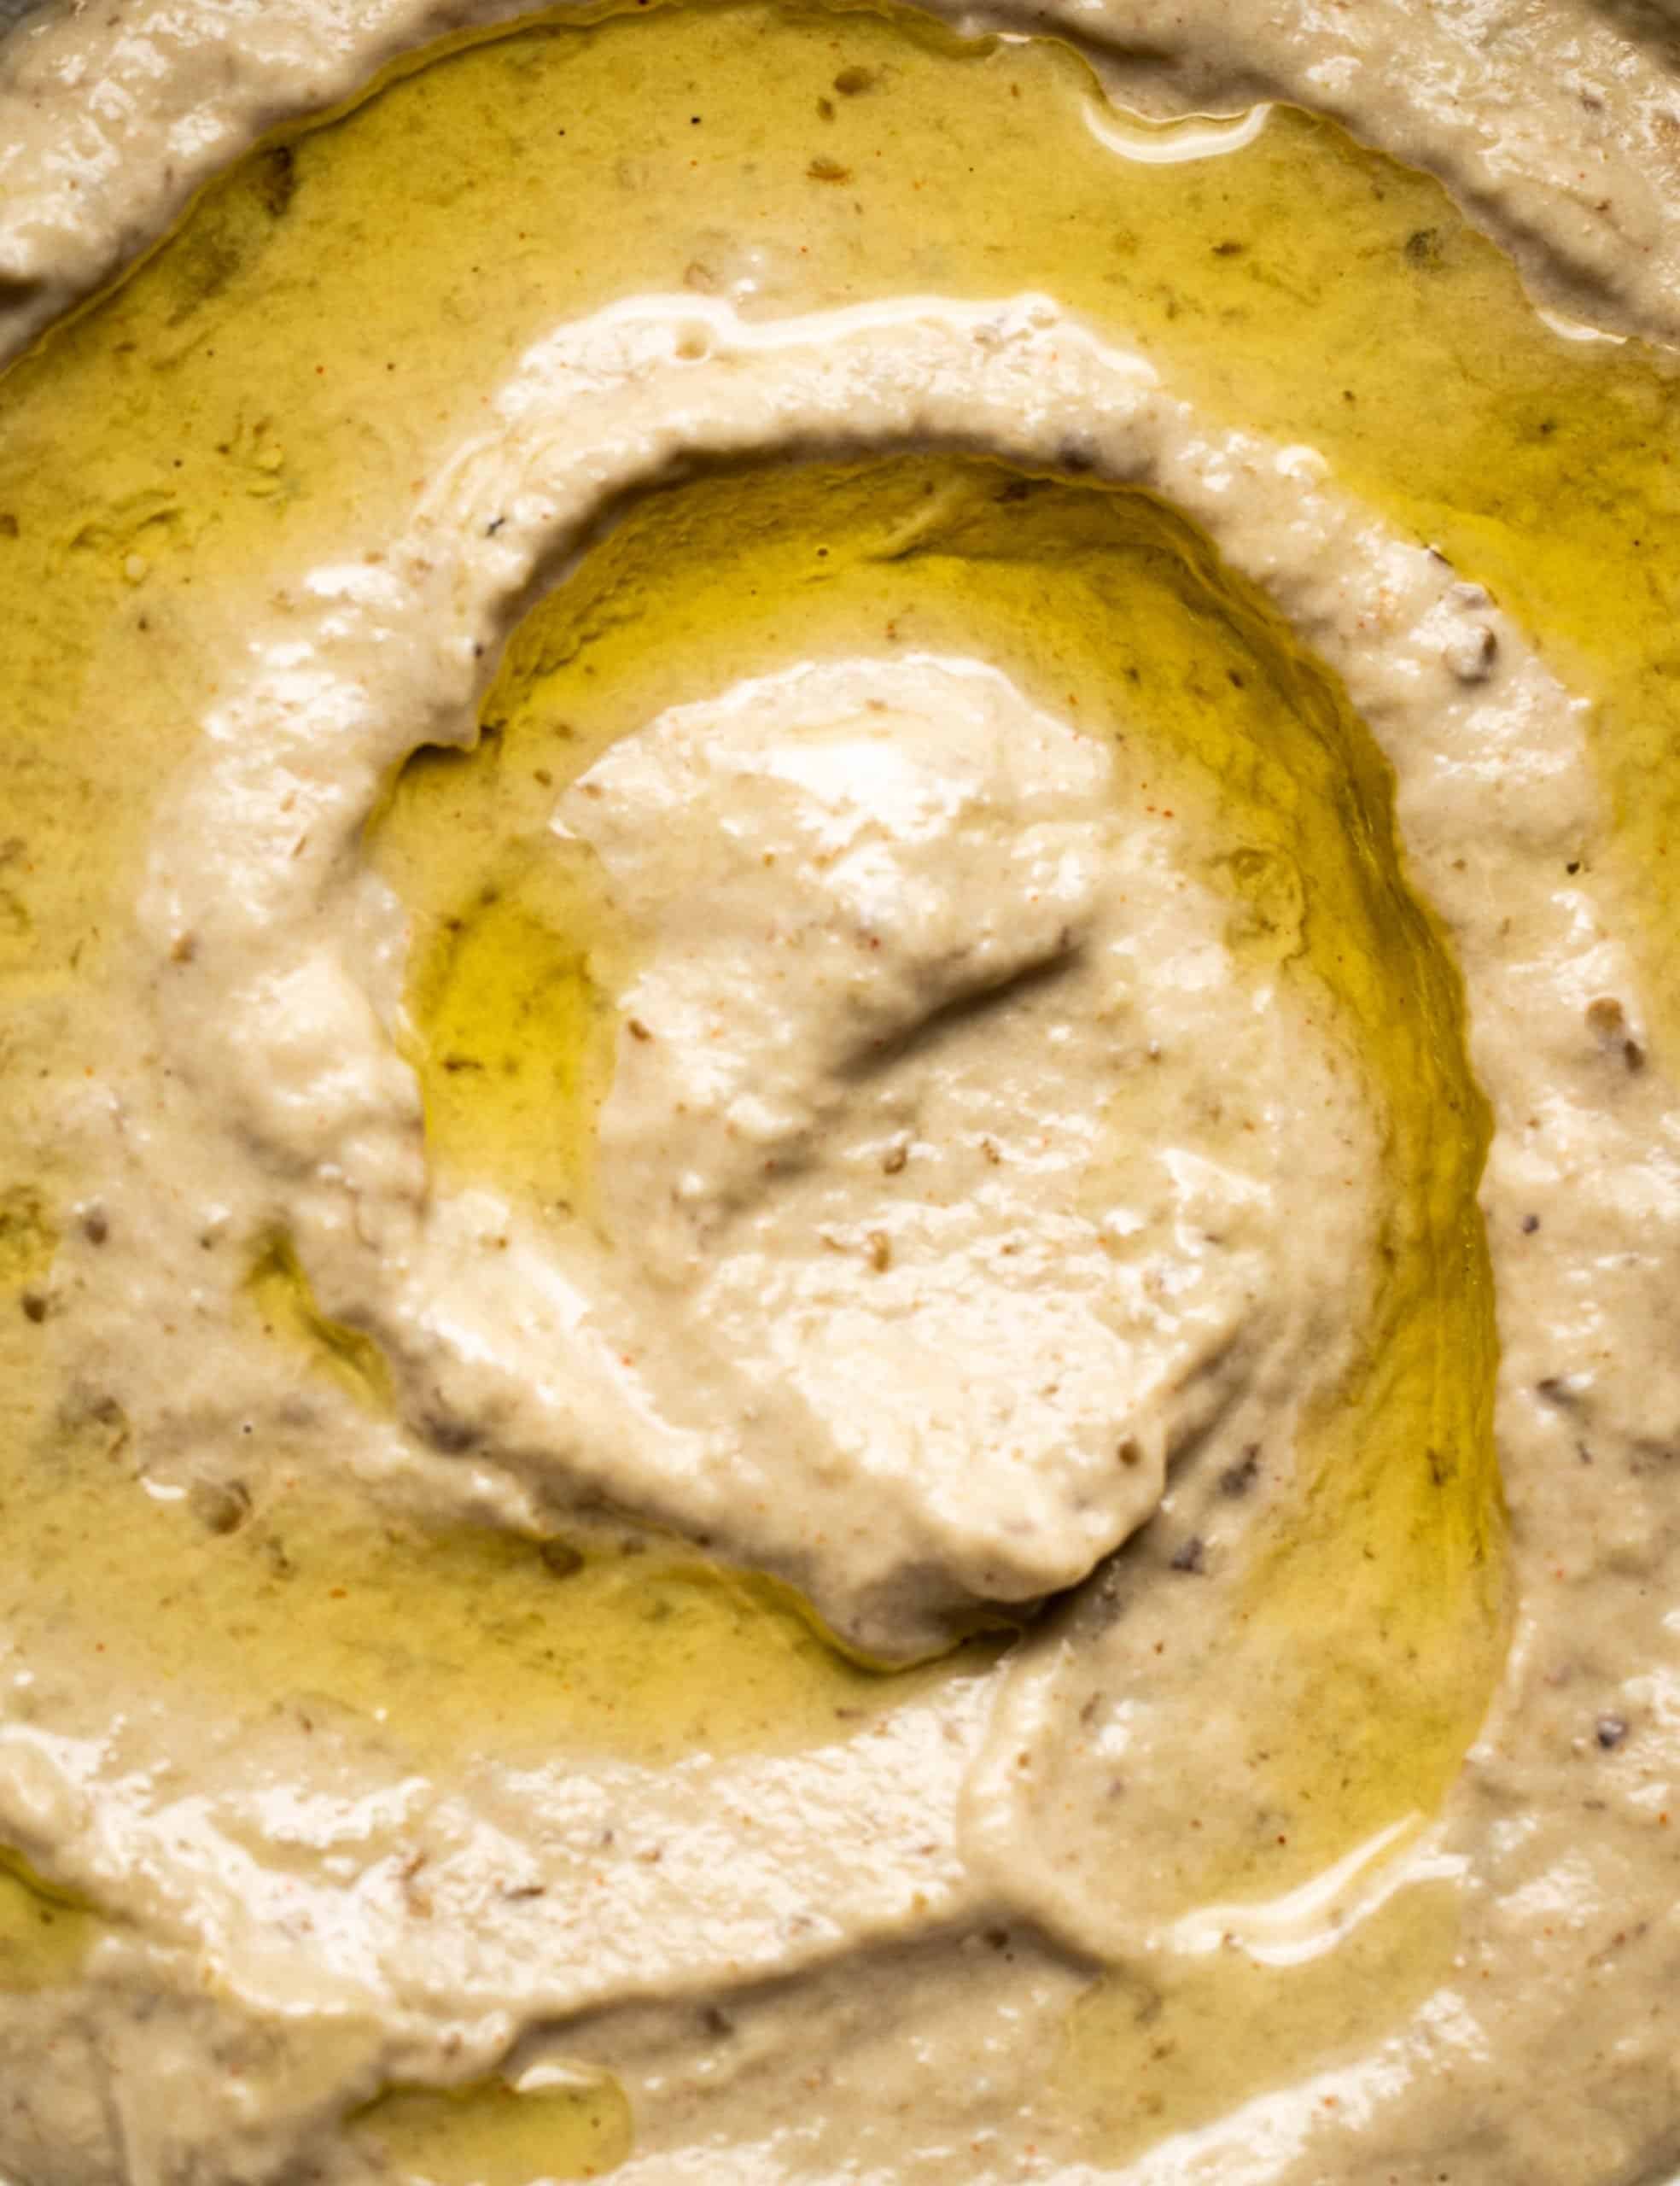 Baba Ganoush dip with a swirl of olive oil